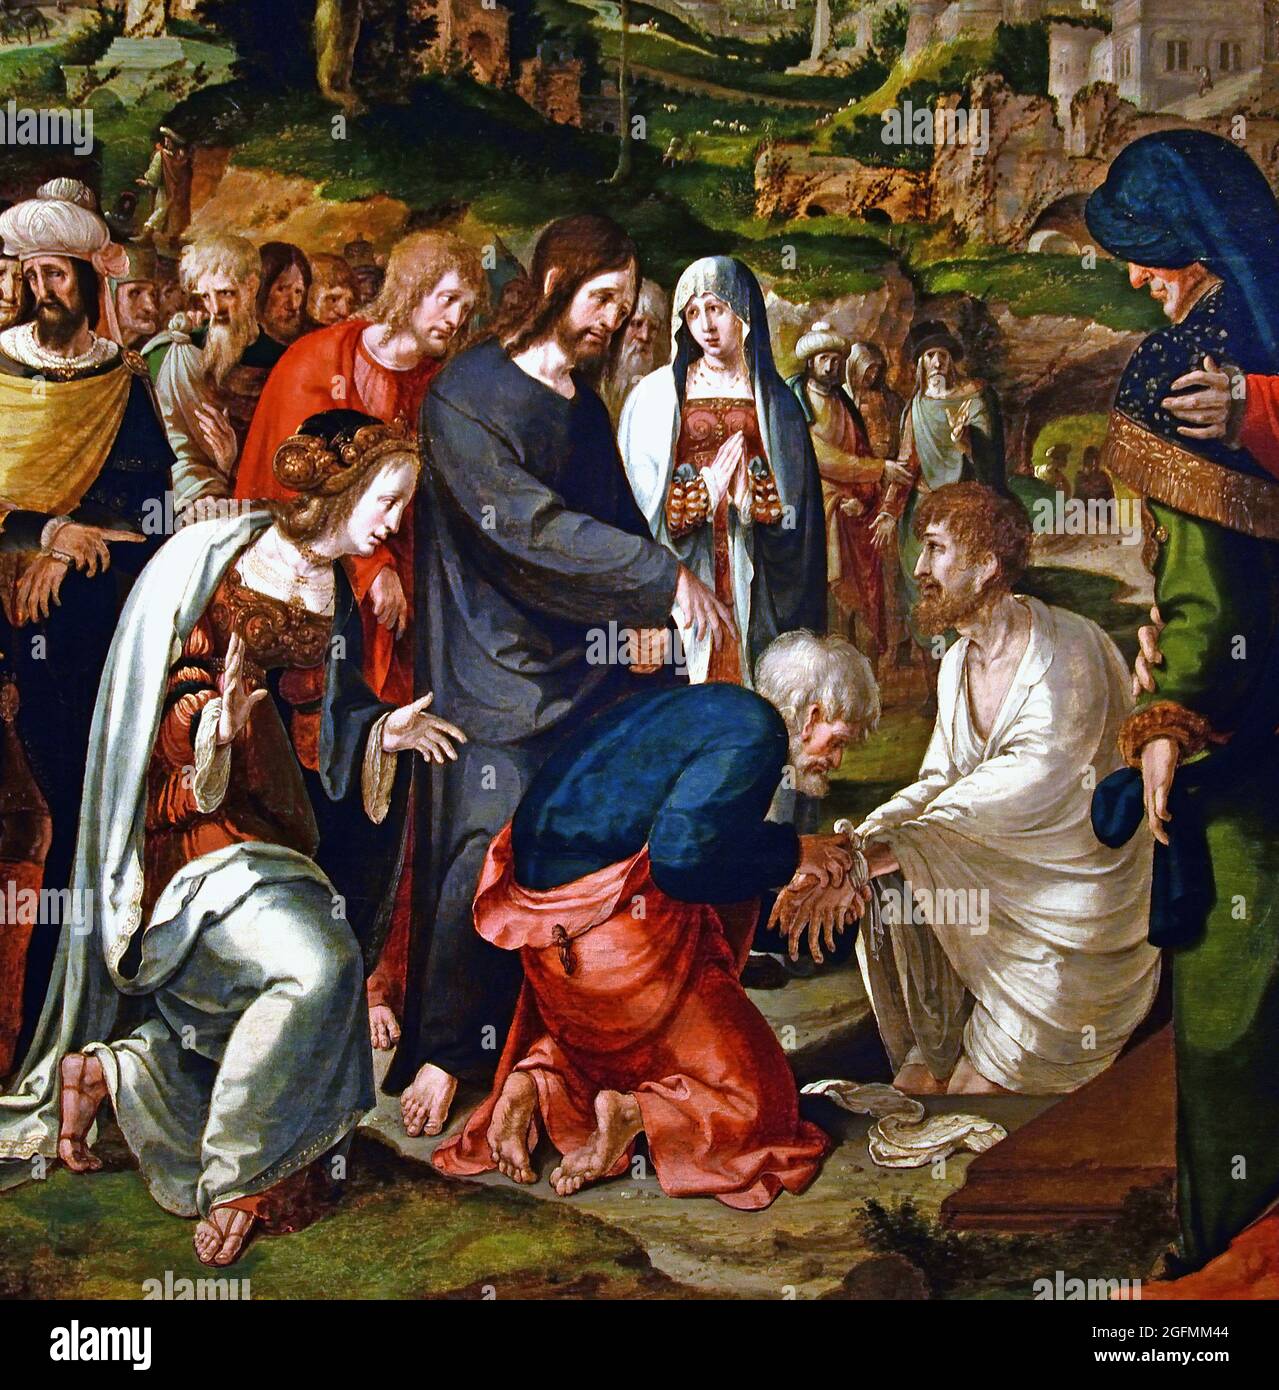 The Raising of Lazarus, Aertgen Claesz van Leyden (attributed to), 1530 -1535 oil on panel, 75.7cm ×  78.8cm  (This triptych was painted to commemorate a married couple, the man and woman shown kneeling on the wings. The central panel appropriately depicts the miracle of Christ raising Lazarus from the dead, an allusion to the promise of eternal life and the belief that death is overcome through faith in Christ.) Stock Photo